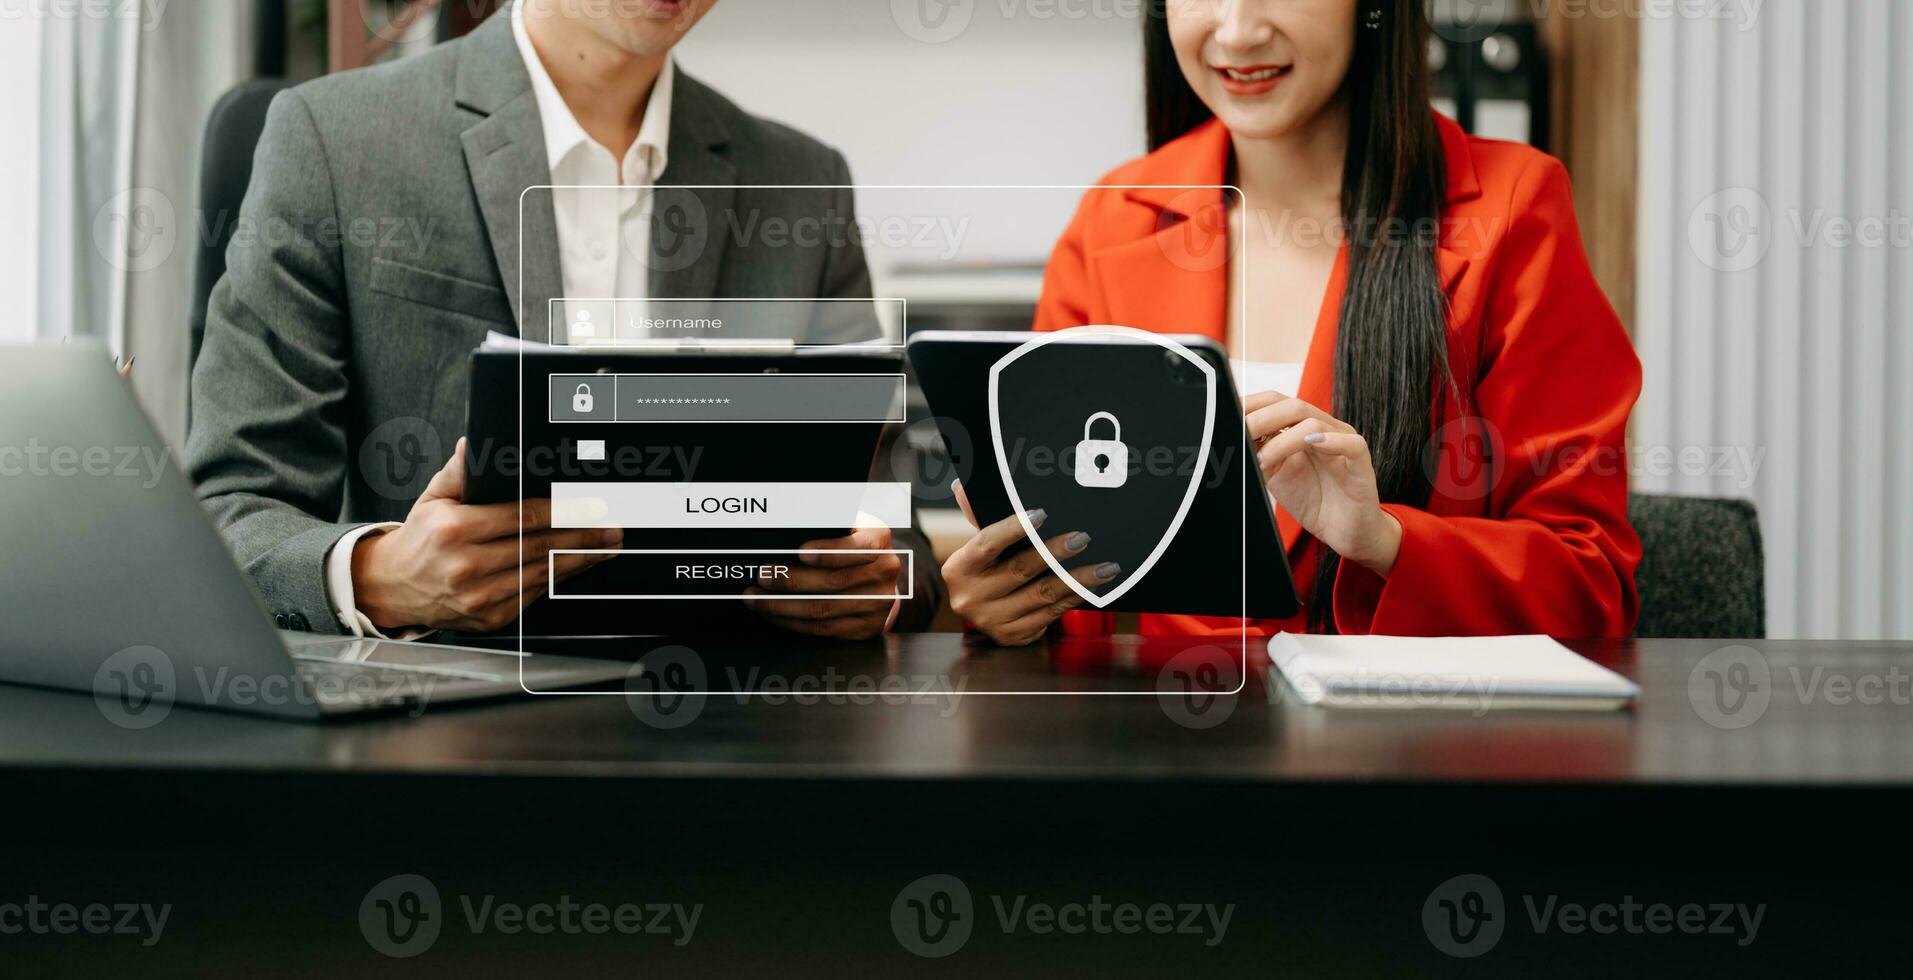 Cyber security concept, Login, User, identification information security and encryption, secure access to user's personal information woman using smart phone and tablet photo